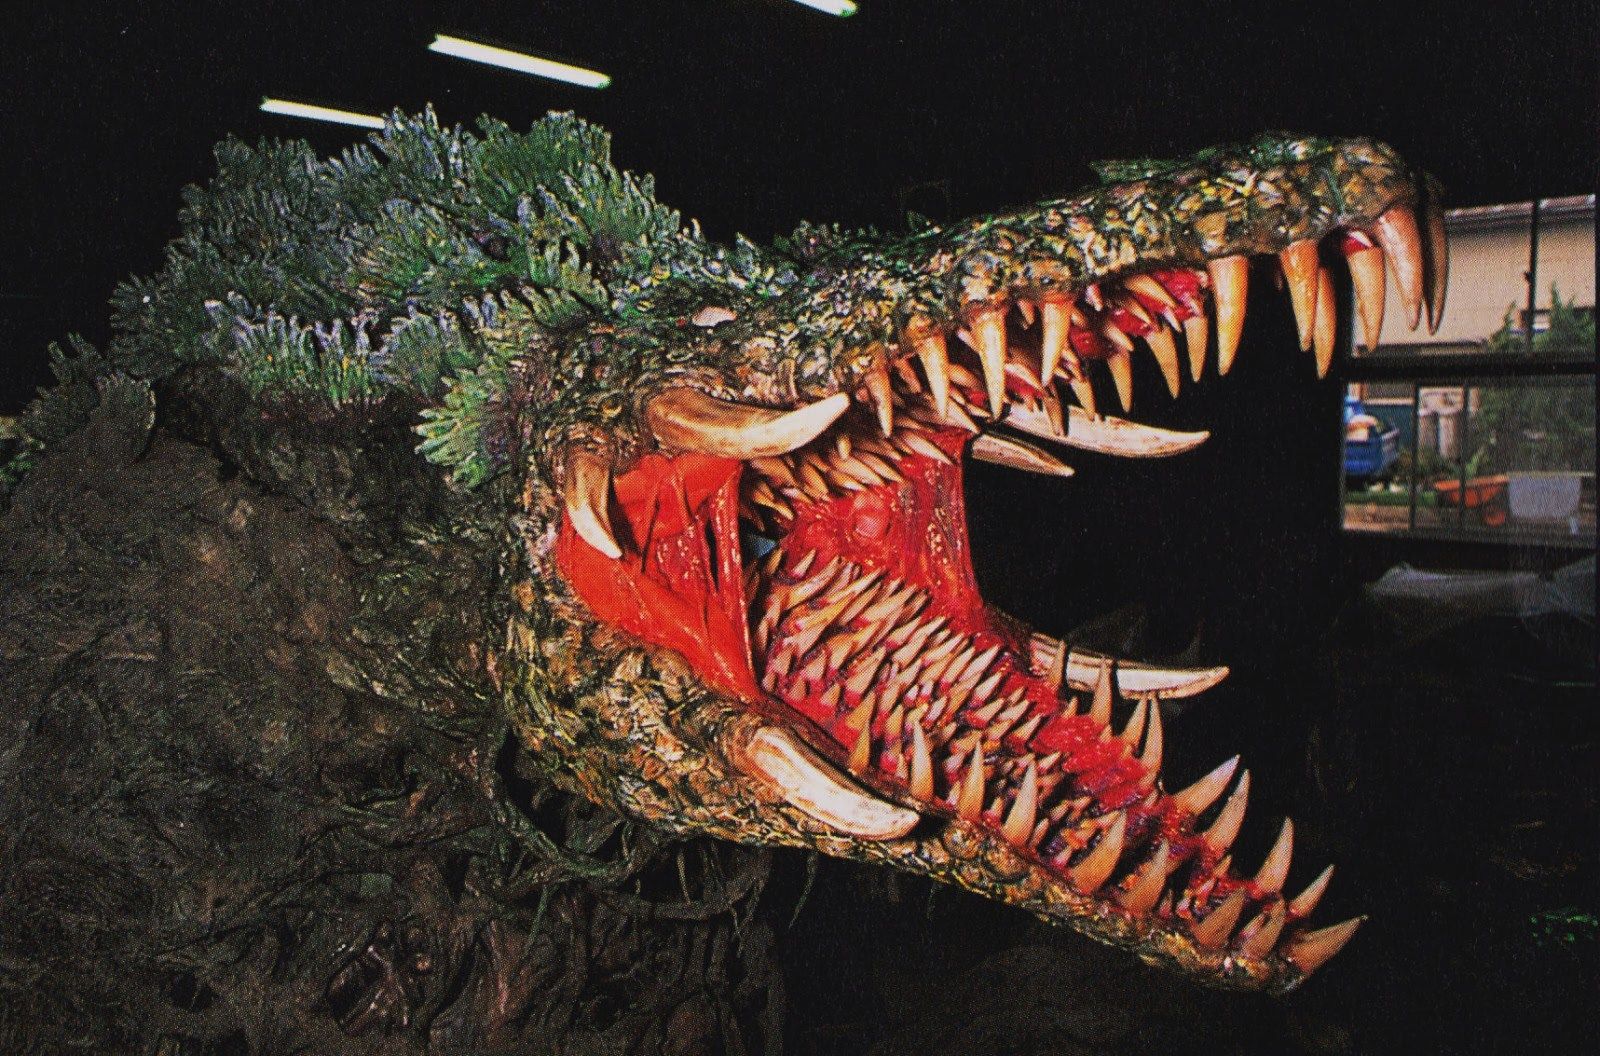 When Roses Attack: 25 Years of Godzilla vs. Biollante with Ed